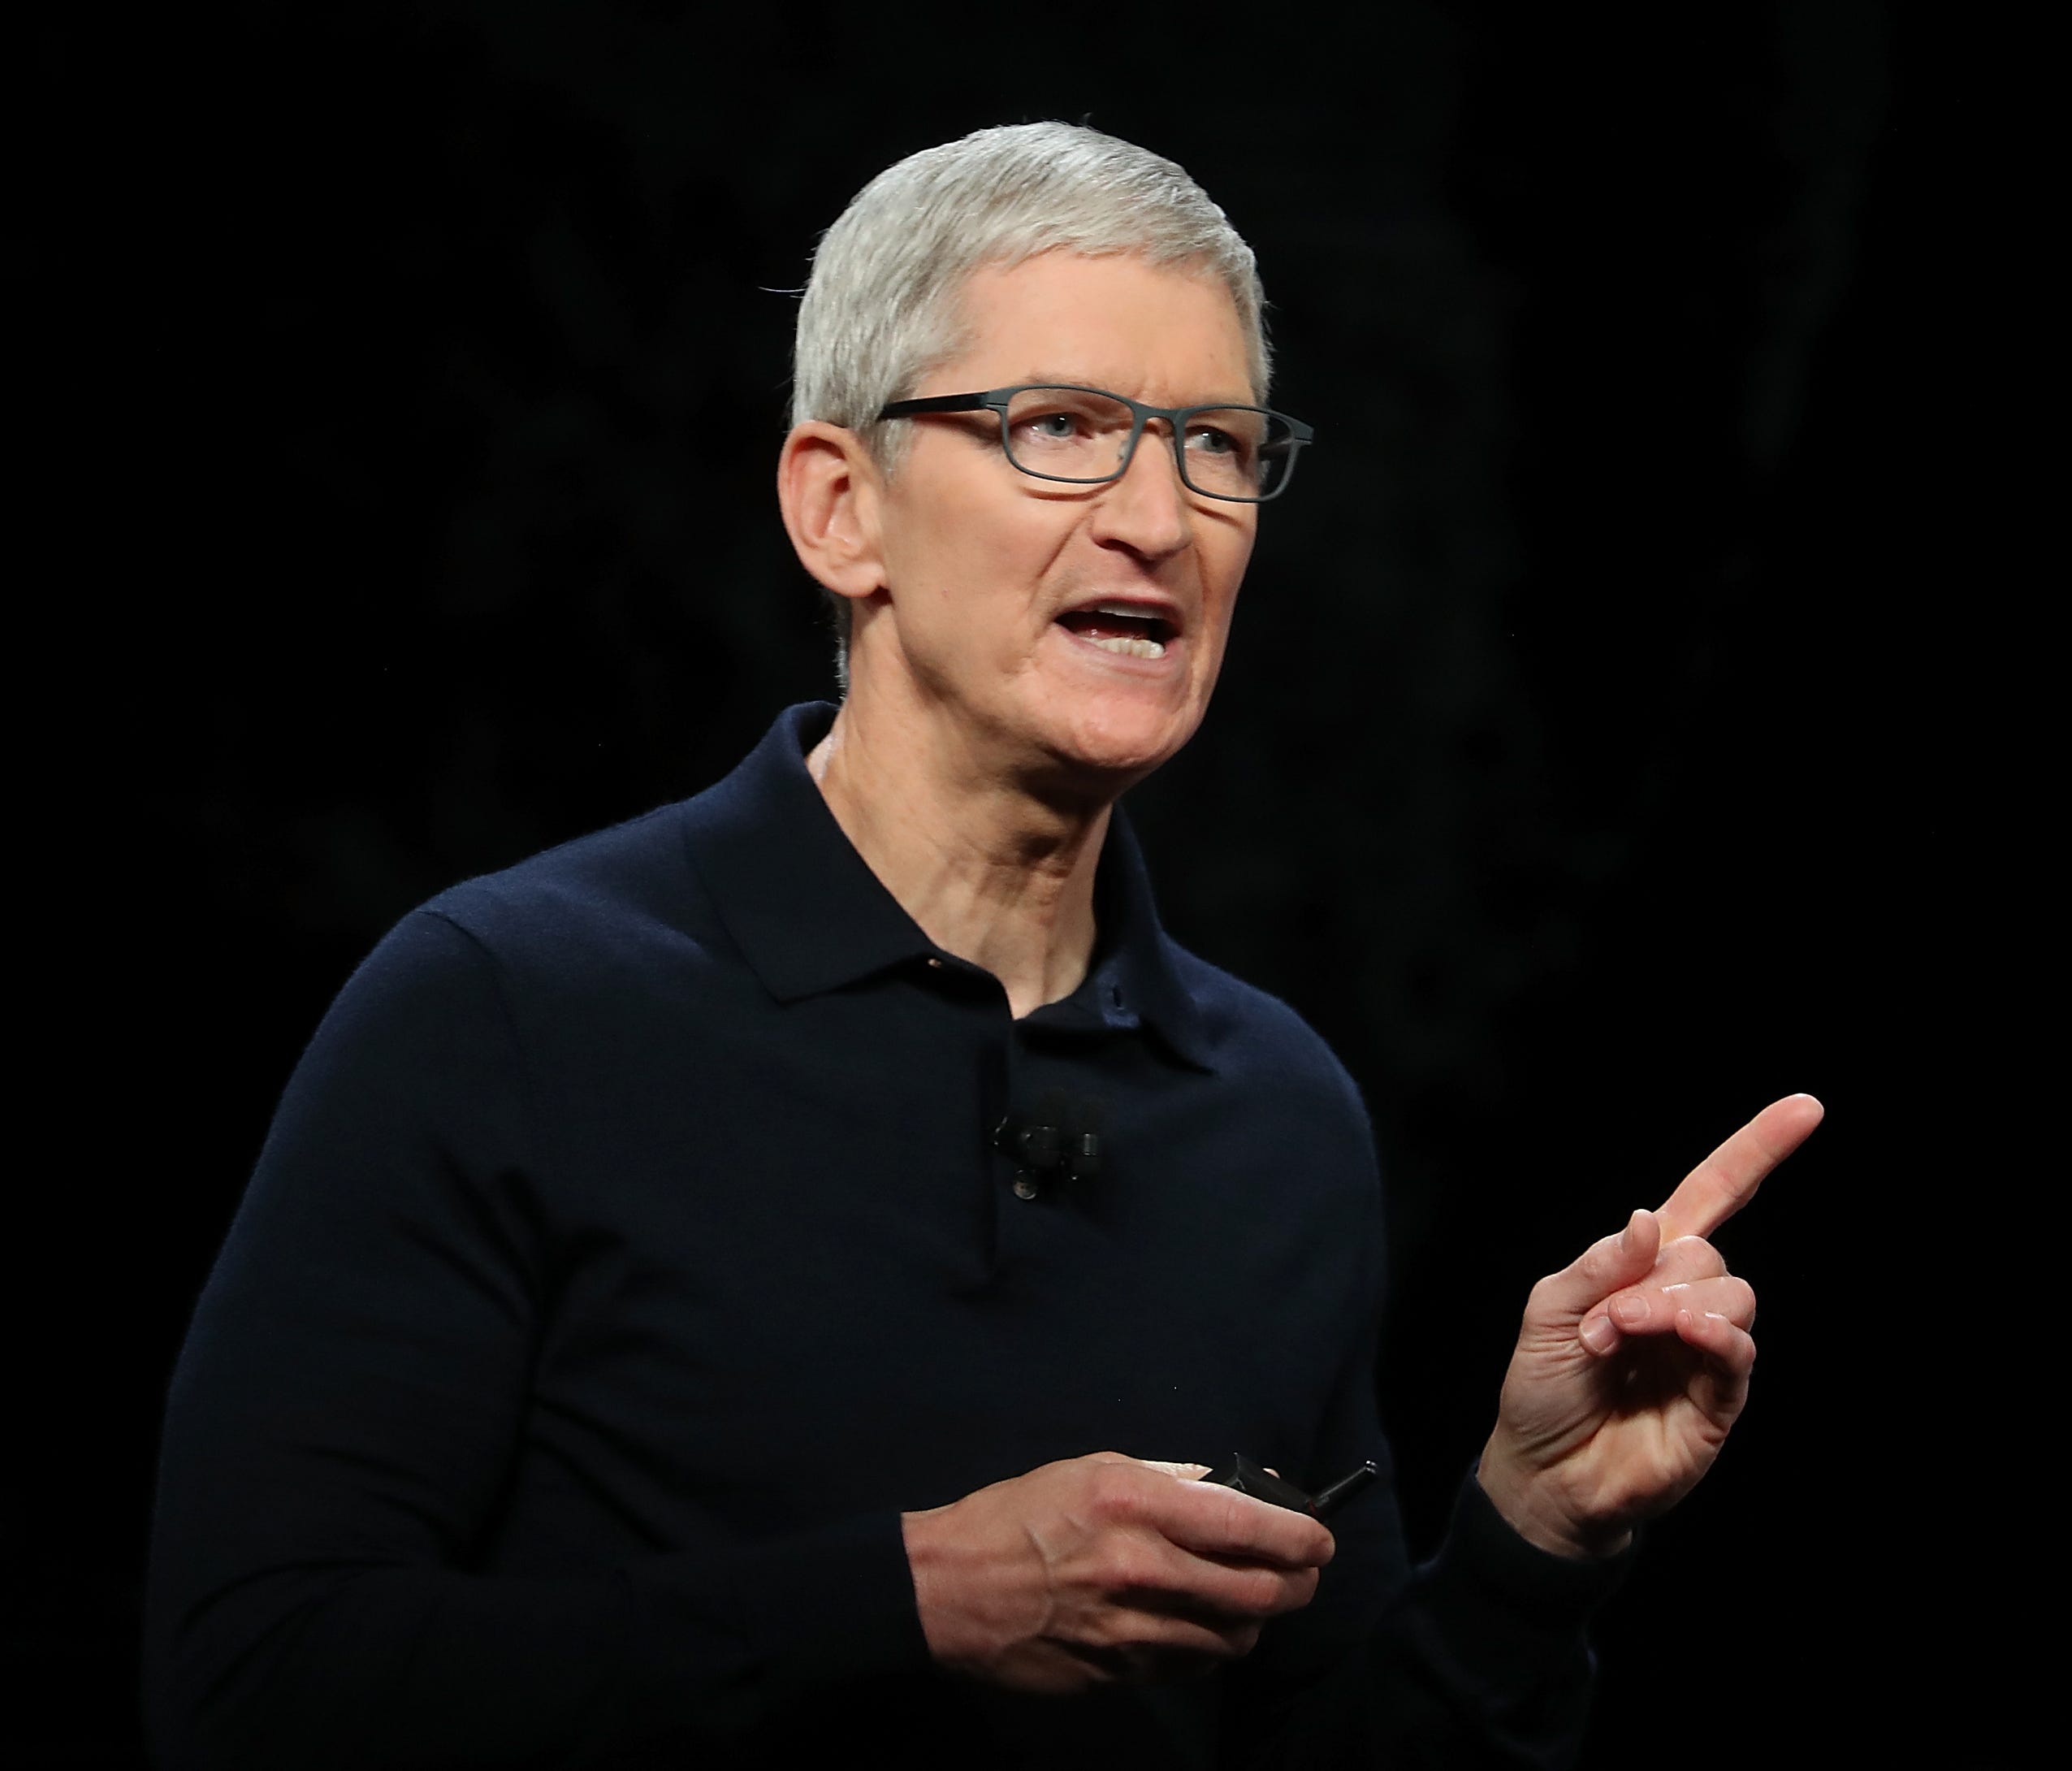 Apple CEO Tim Cook speaks during the 2018 Apple Worldwide Developer Conference at the San Jose Convention Center on June 4, 2018 in San Jose, Calif. The WWDC runs through June 8.